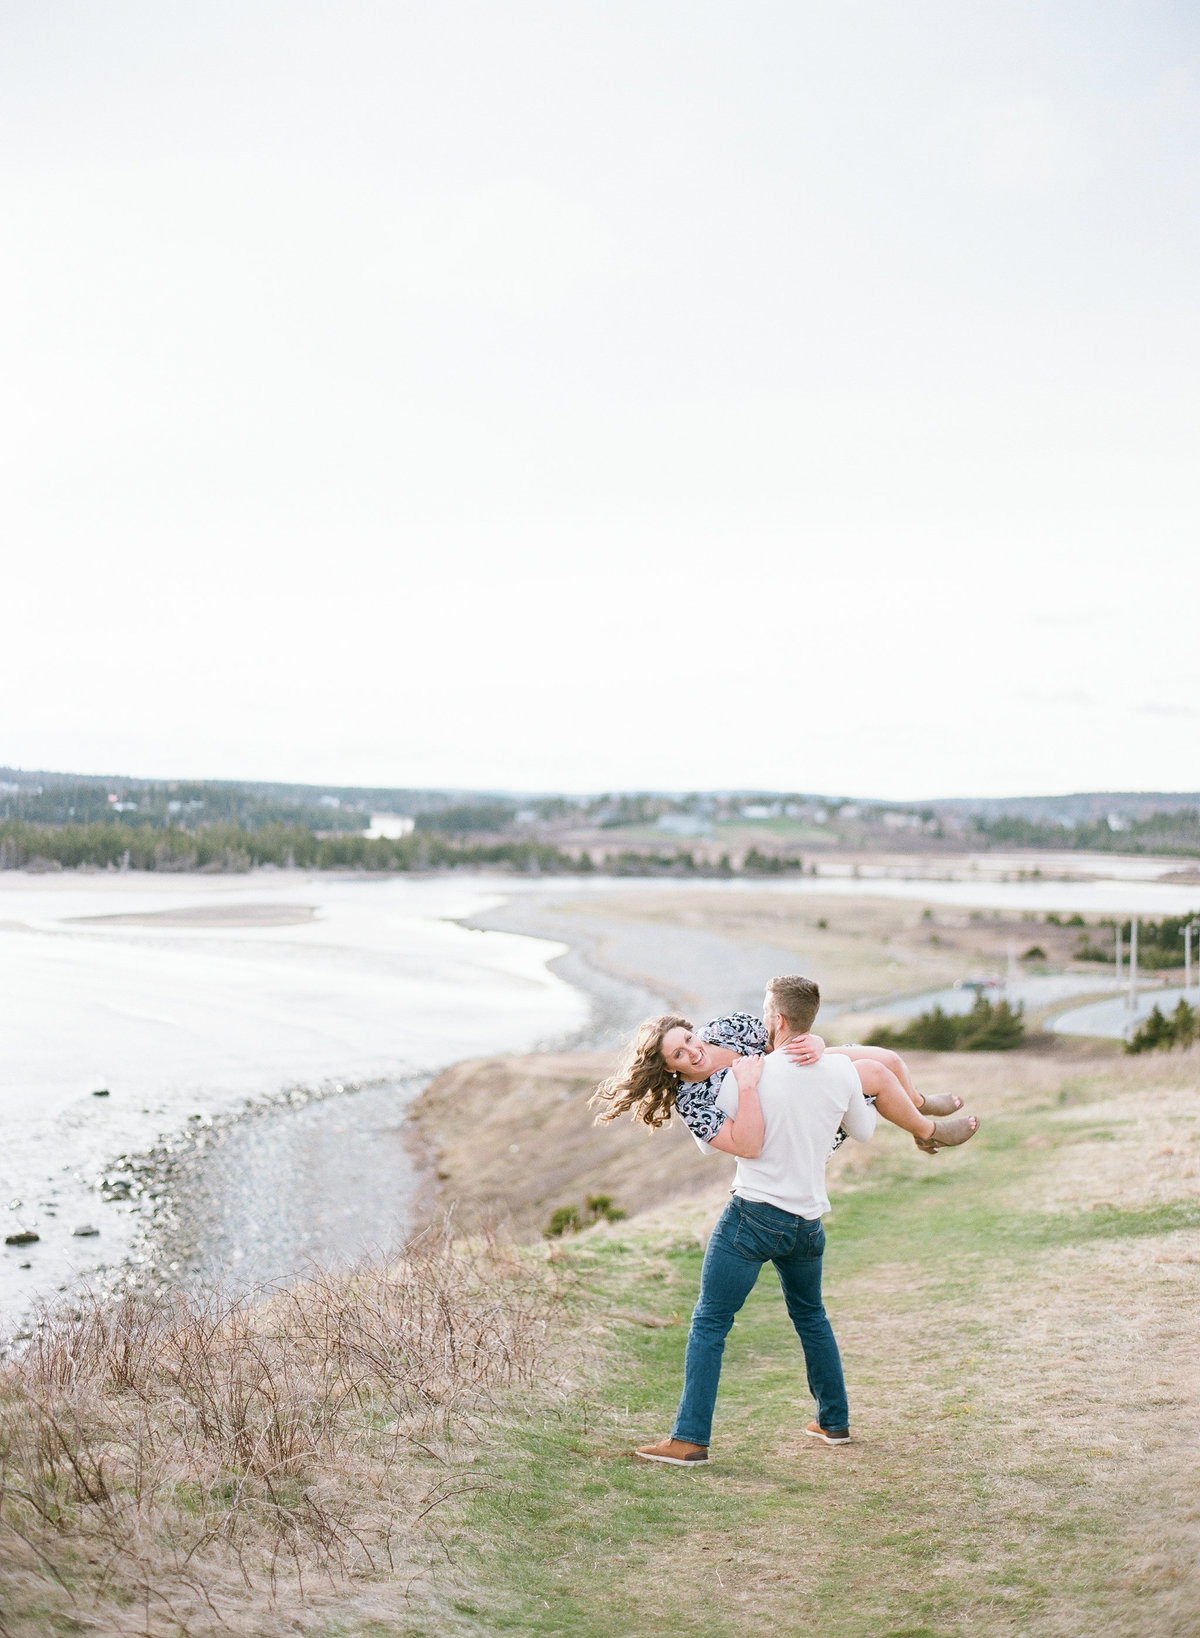 Jacqueline Anne Photography - Akayla and Andrew - Lawrencetown Beach-27